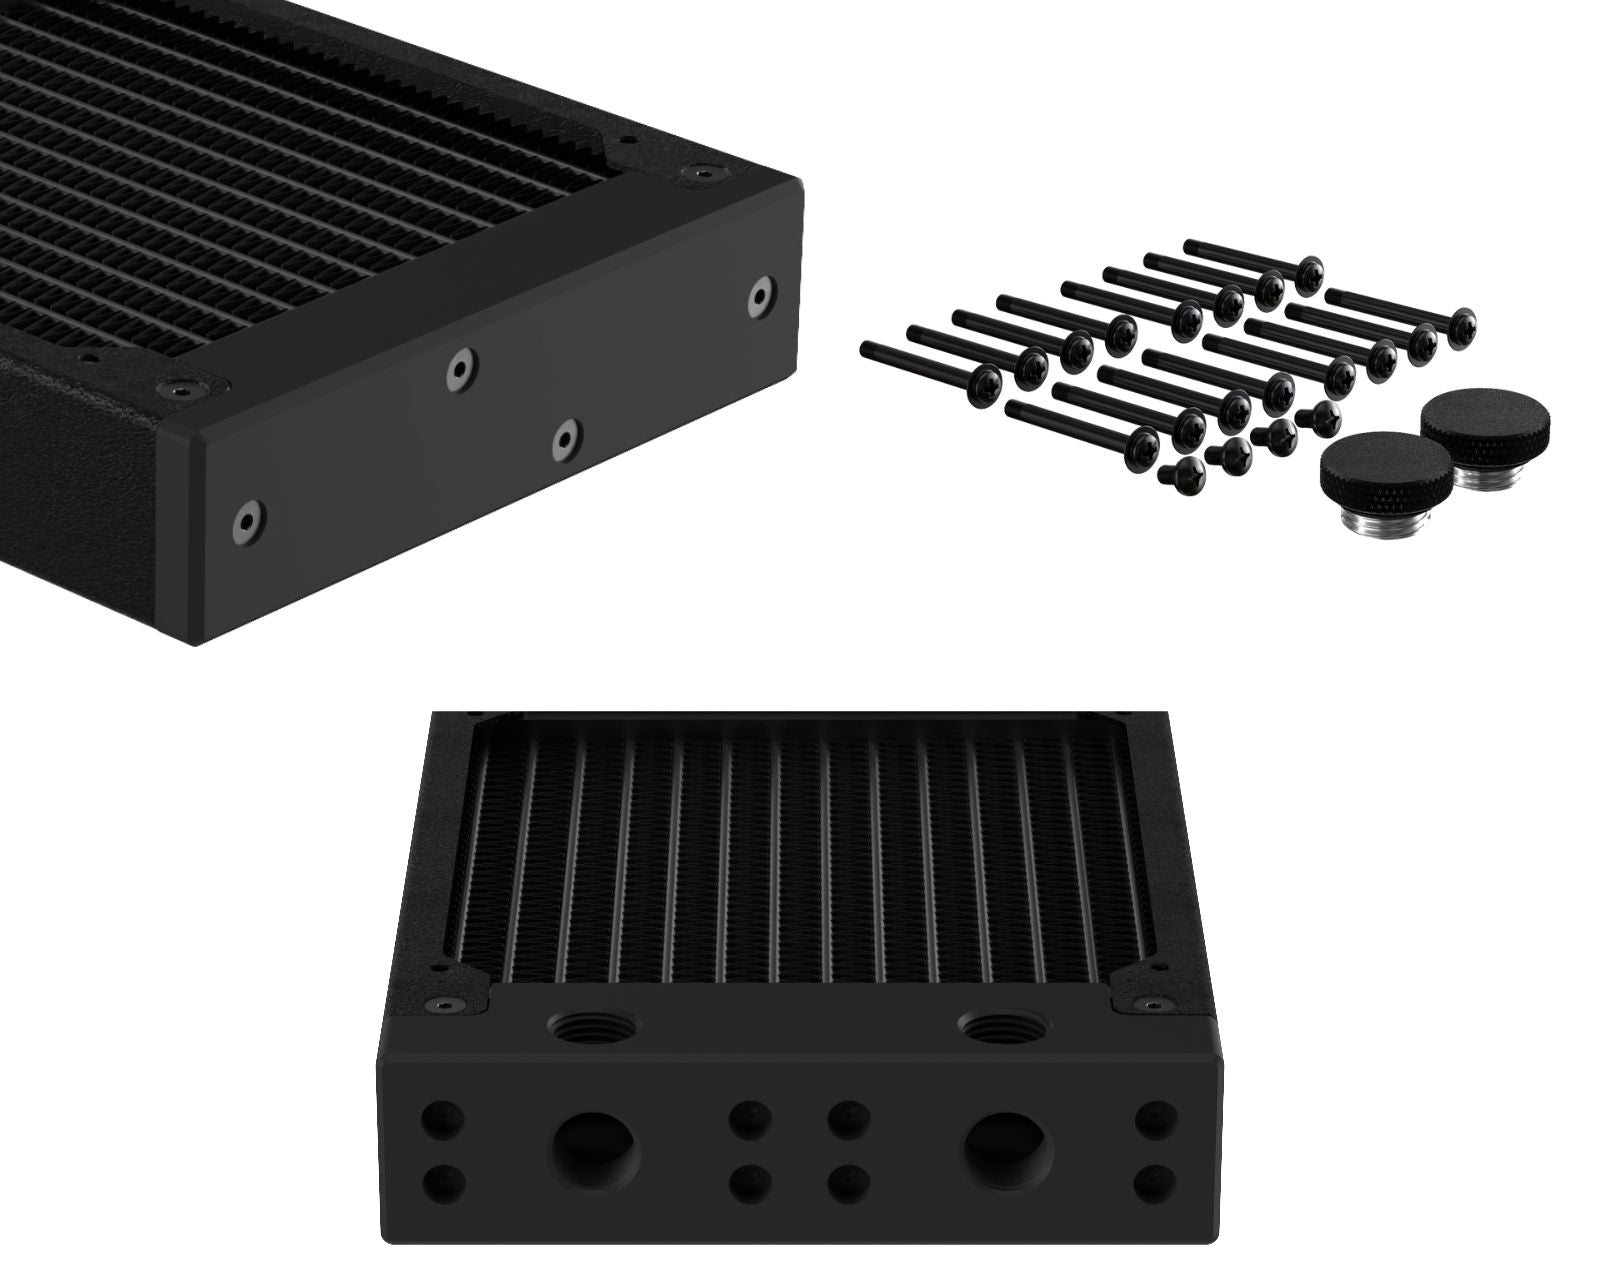 PrimoChill 480SL (30mm) EXIMO Modular Radiator, Black POM, 4x120mm, Quad Fan (R-SL-BK48) Available in 20+ Colors, Assembled in USA and Custom Watercooling Loop Ready - TX Matte Black